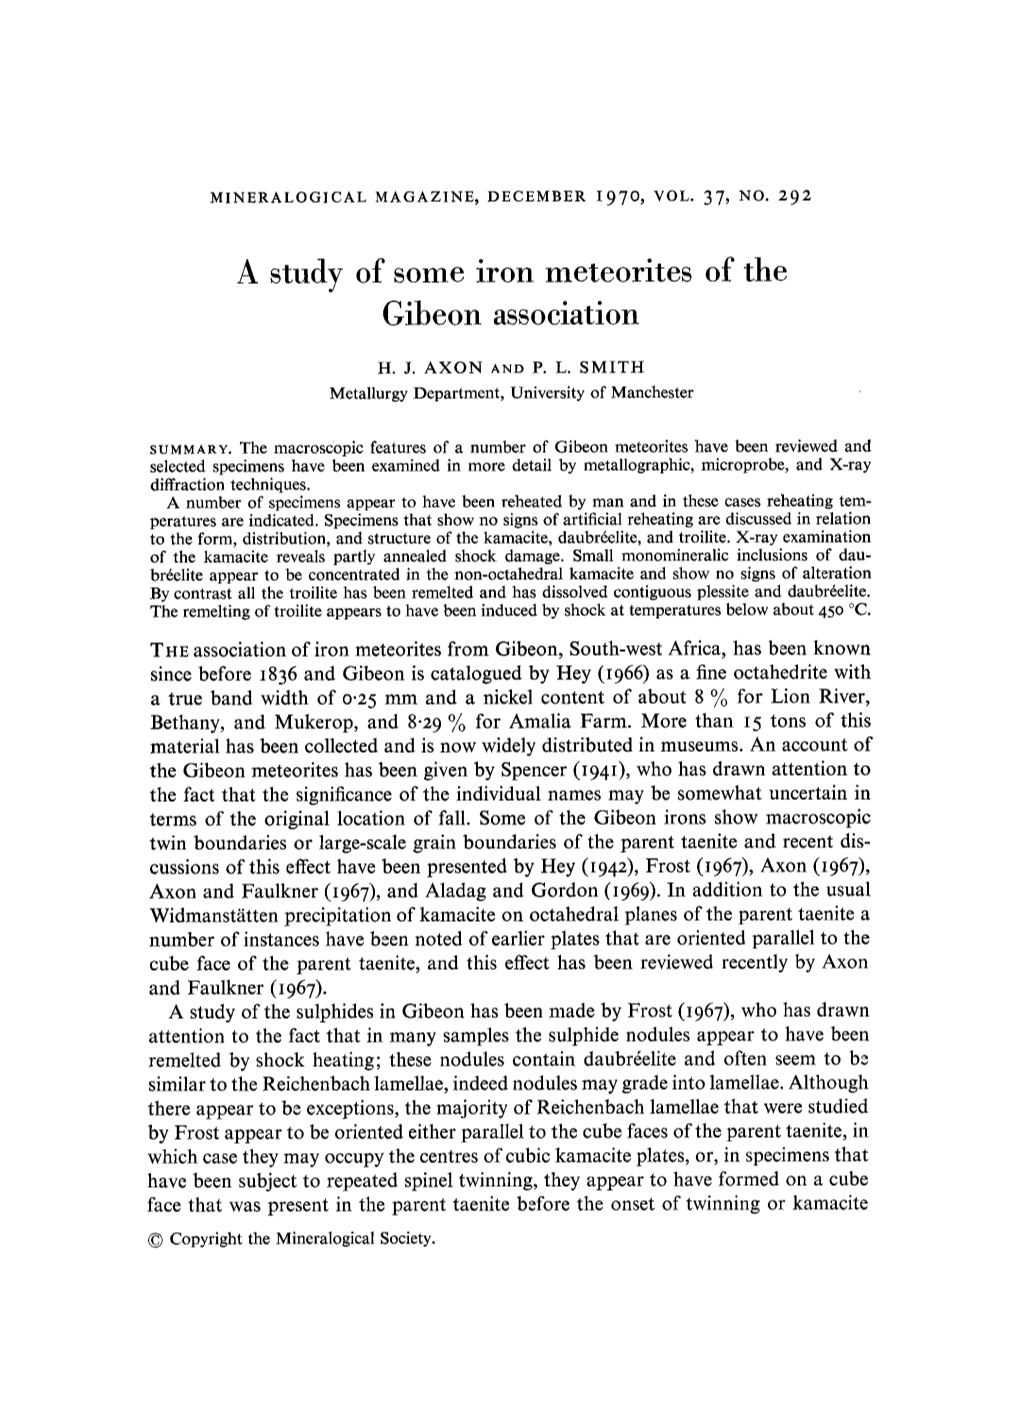 A Study of Some Iron Meteorites of the Gibeon Association